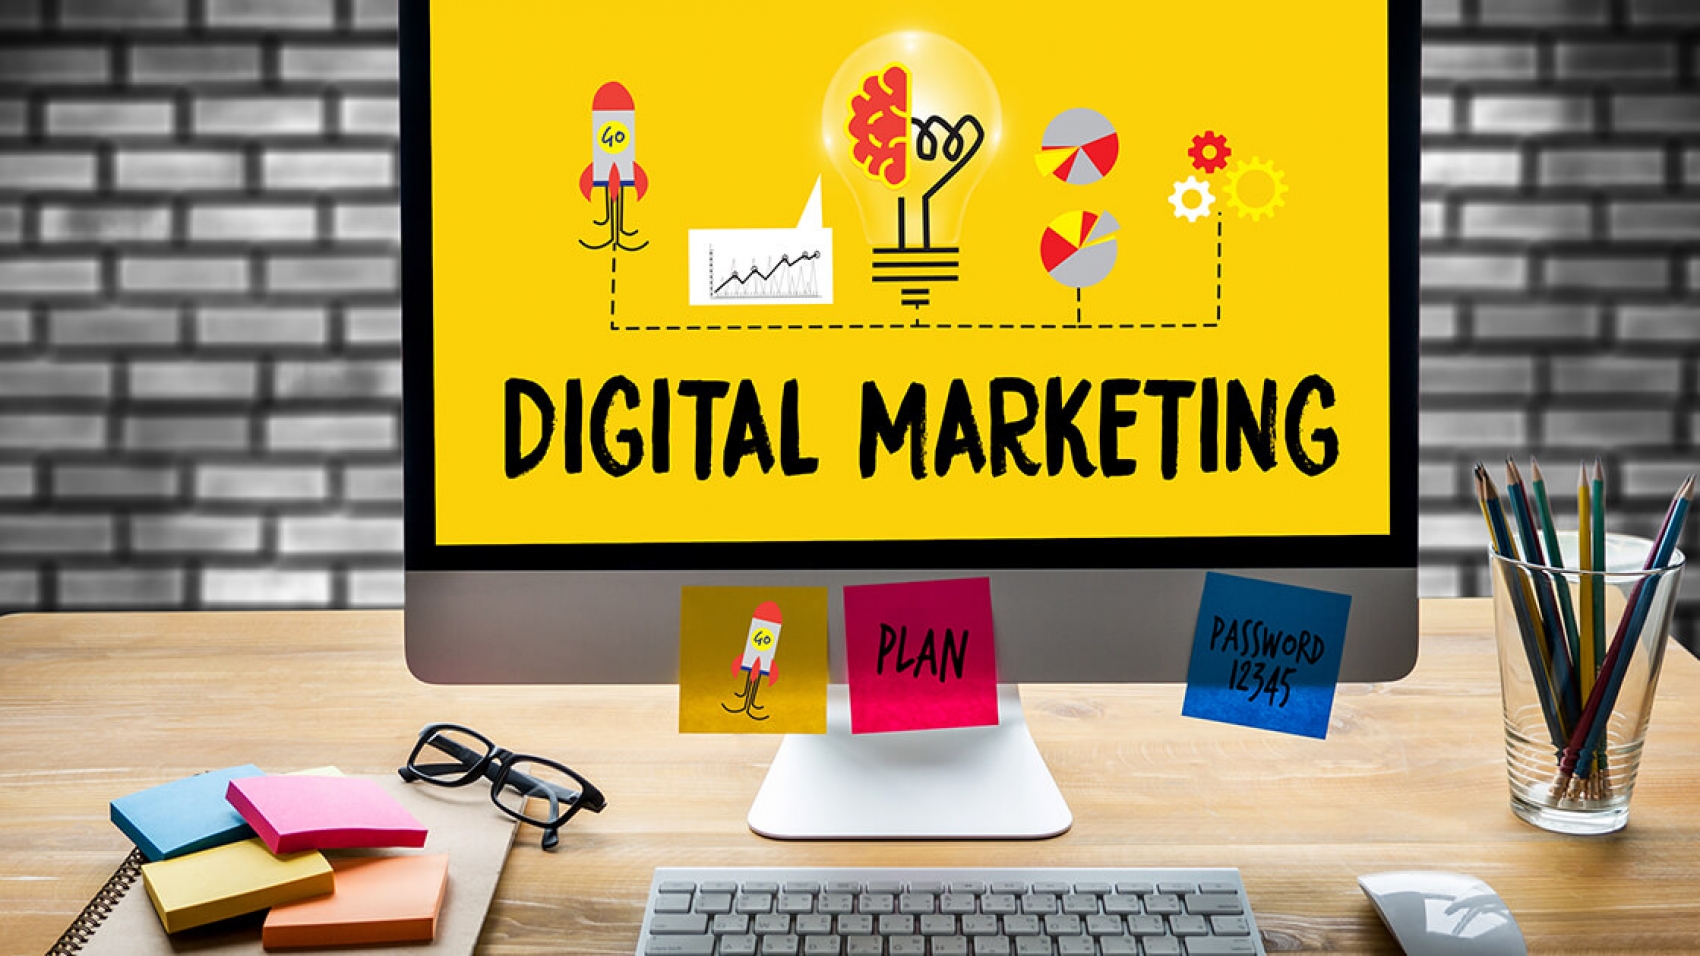 5 reasons why Digital Marketing is important in today’s business?